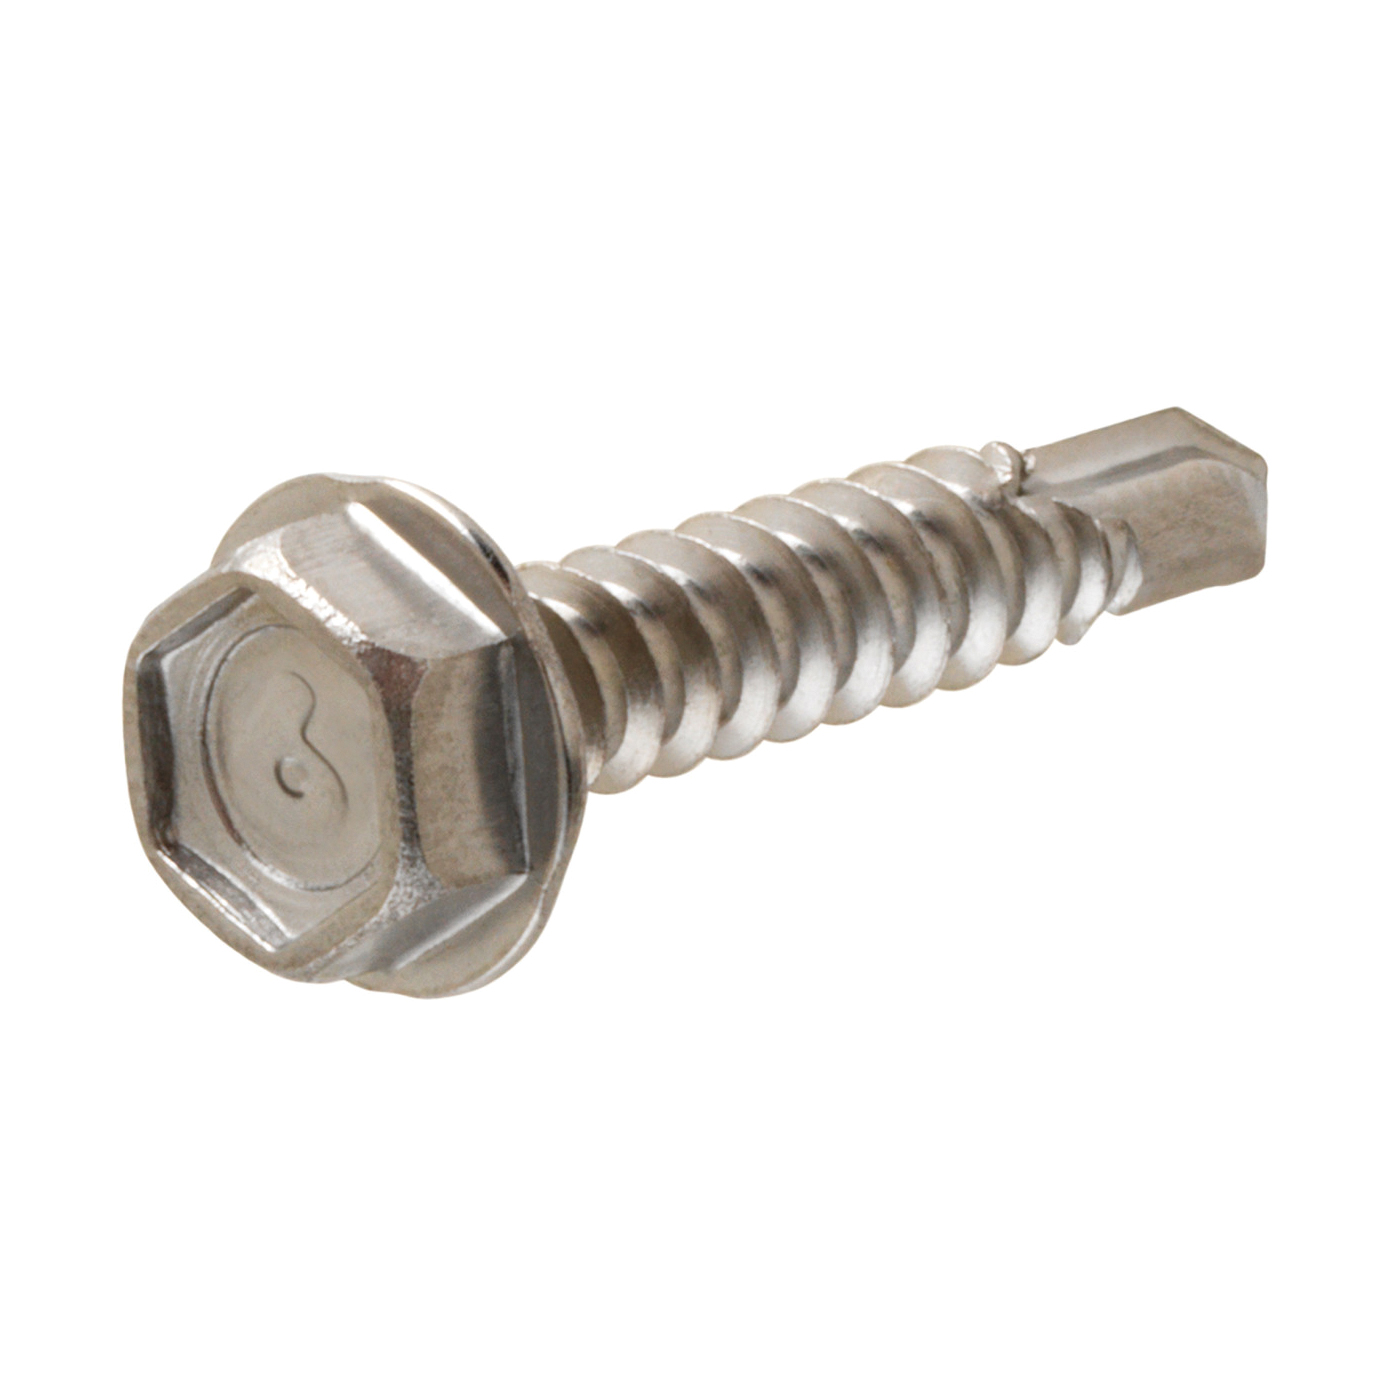 881834 Screw, #8 Thread, 3/4 in L, Washer Head, Hex Drive, Self-Drilling Point, Stainless Steel